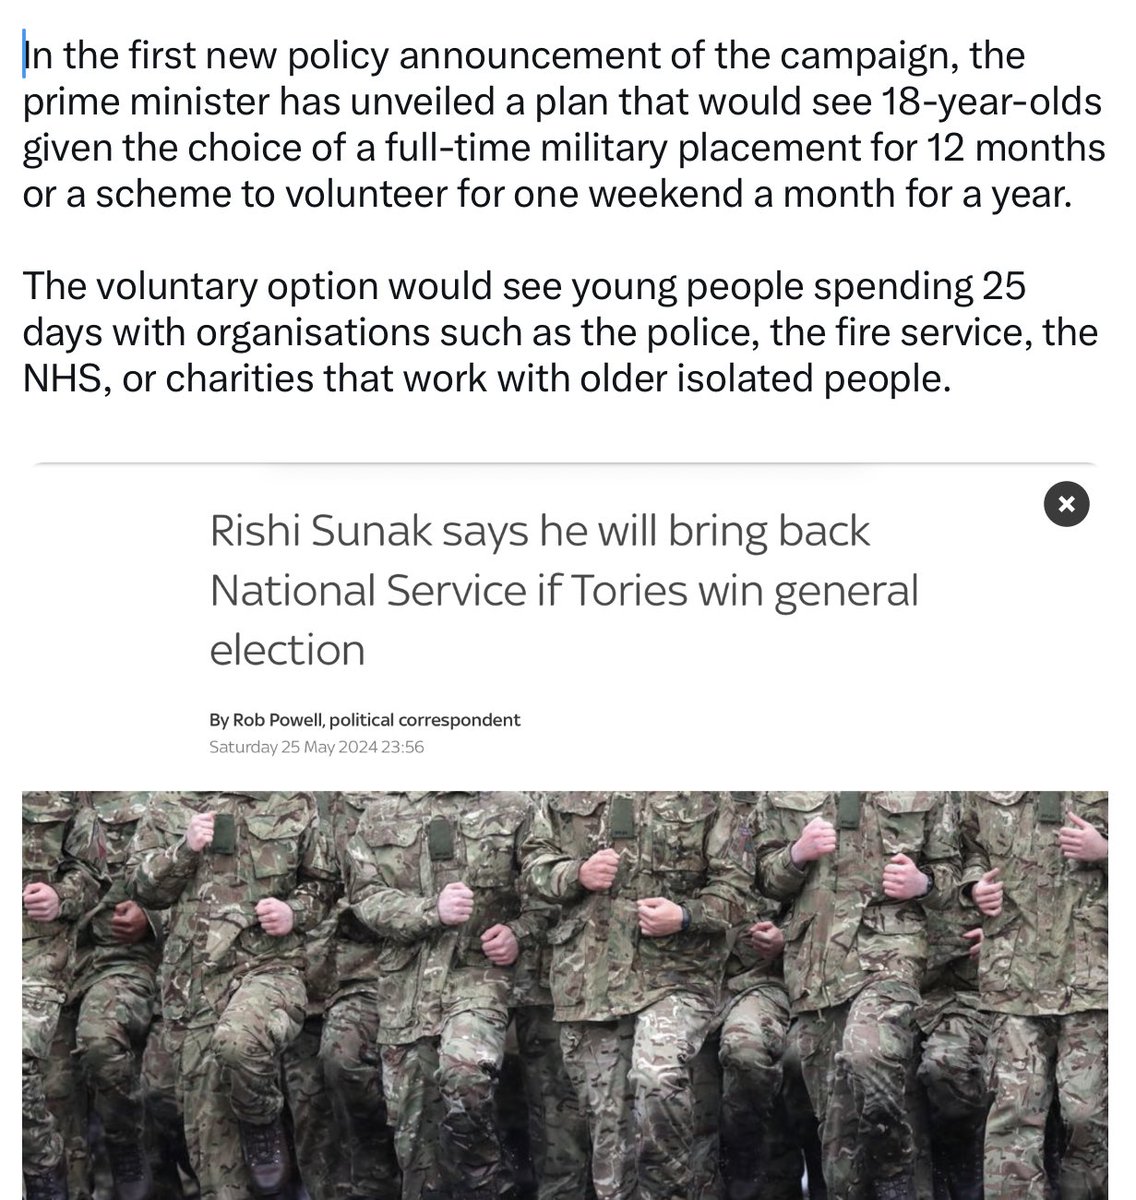 Sunak plans to bring back National Service? Wonder how the organisations themselves view this plan? The Police, Fire Service, NHS having to supervise unwilling 18 year olds? news.sky.com/story/sunak-sa…